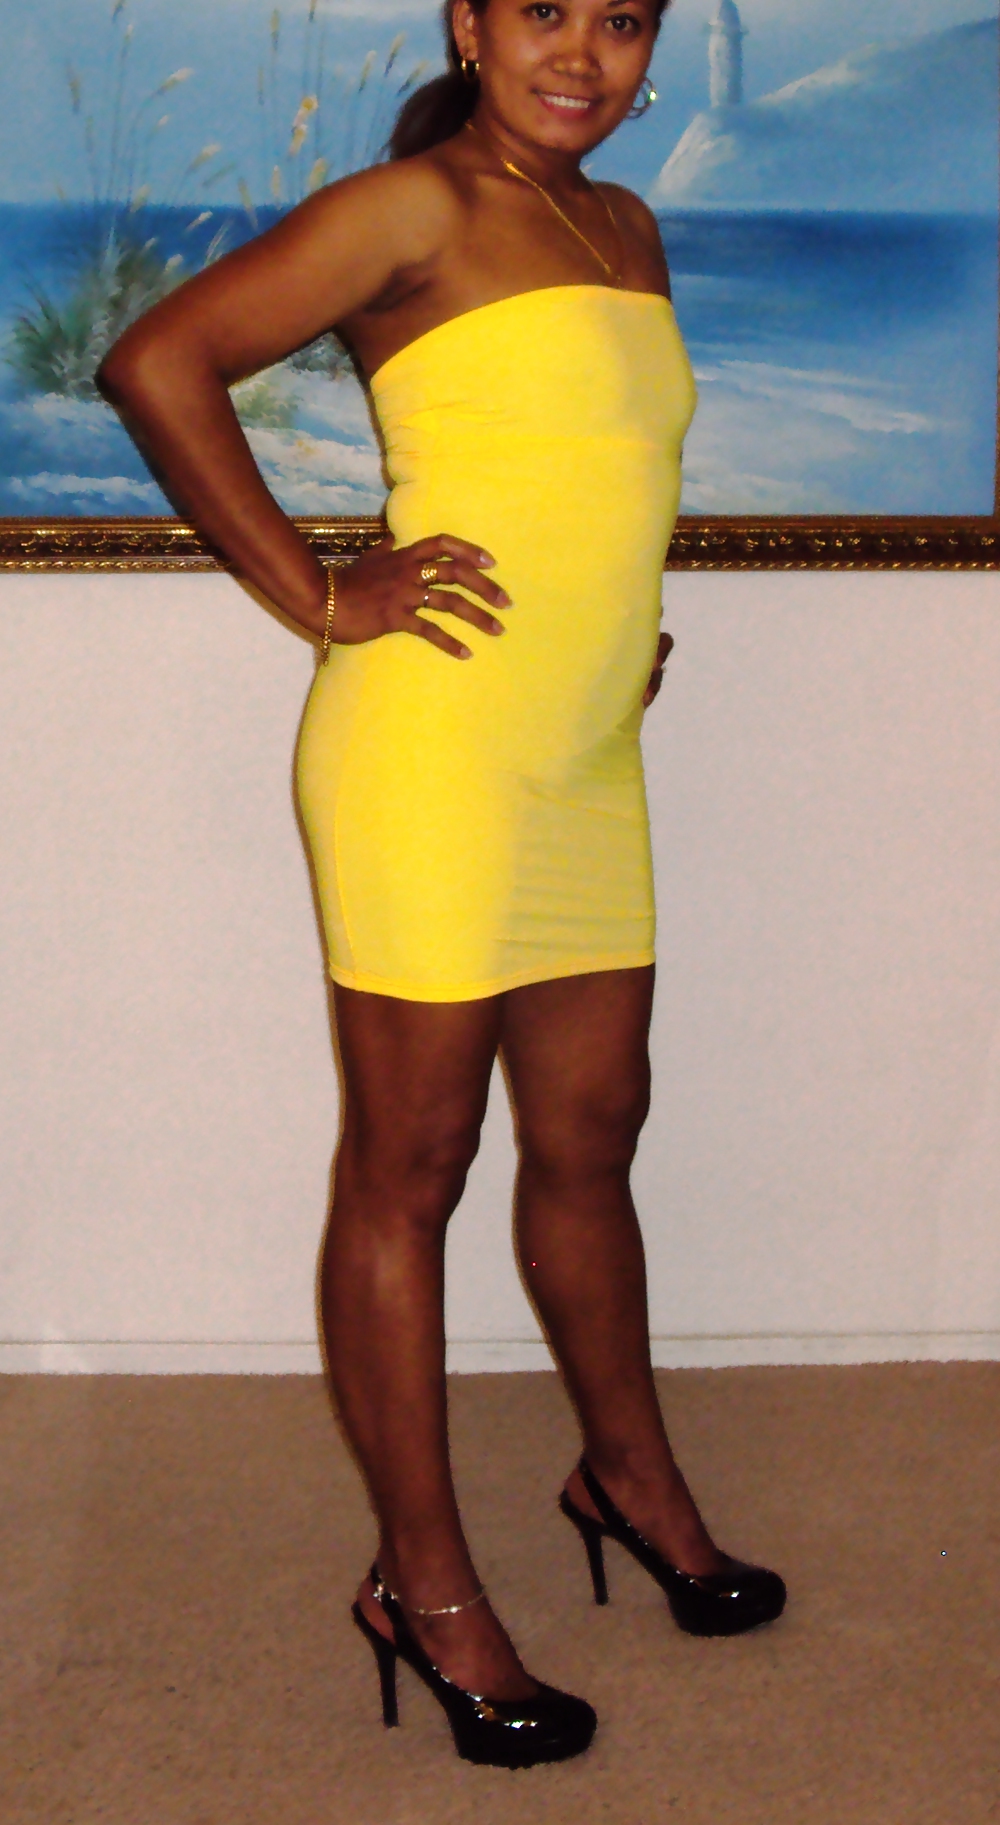 Baby Doll, Hot Hot Hot, after going out in Yellow & Black! #11825840